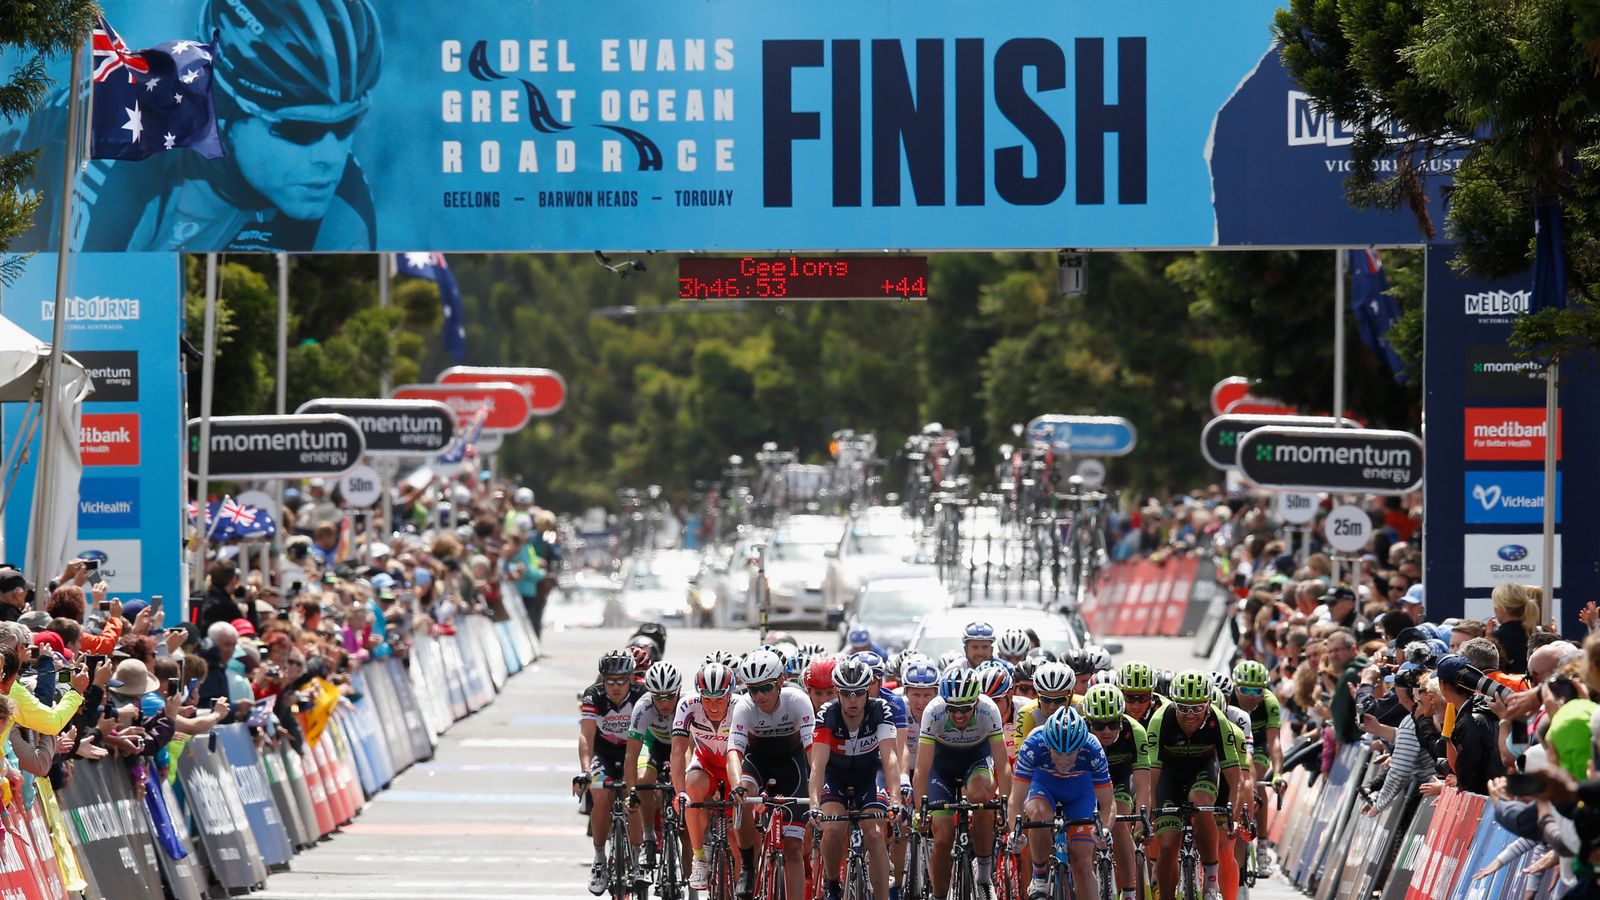 Great Ocean Road Race guide Cycling News Sky Sports